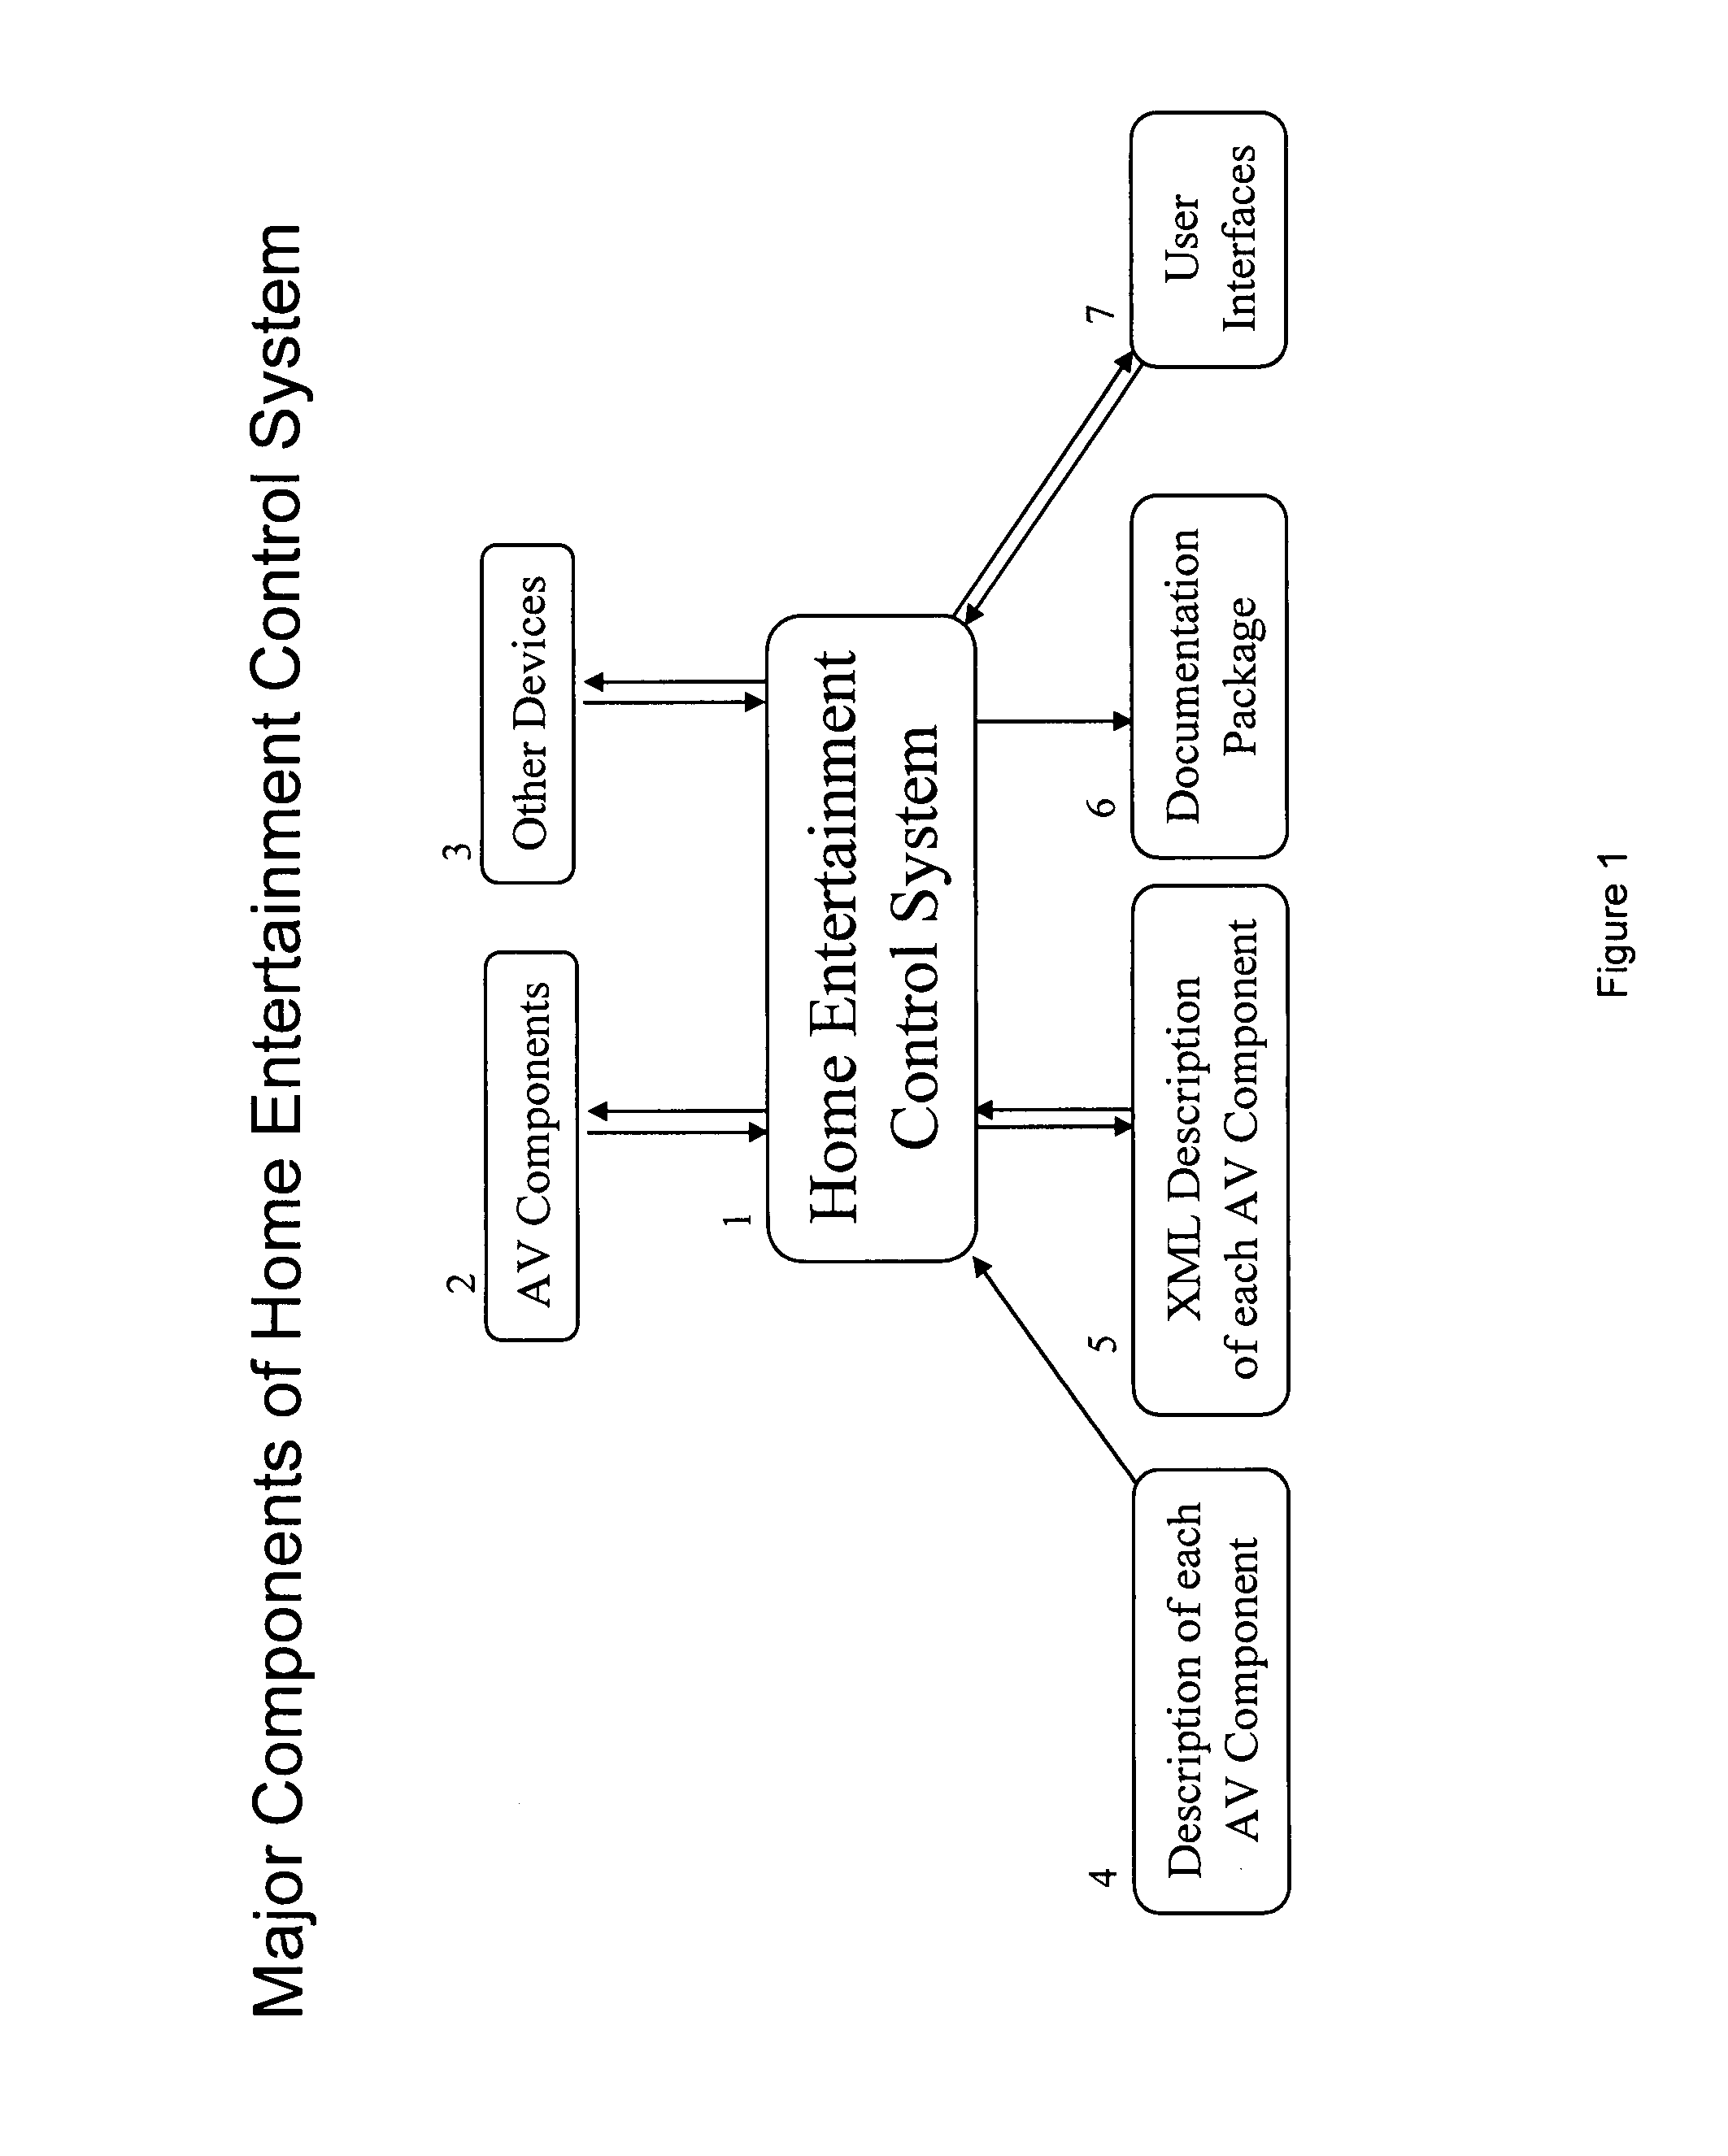 Home entertainment system and method